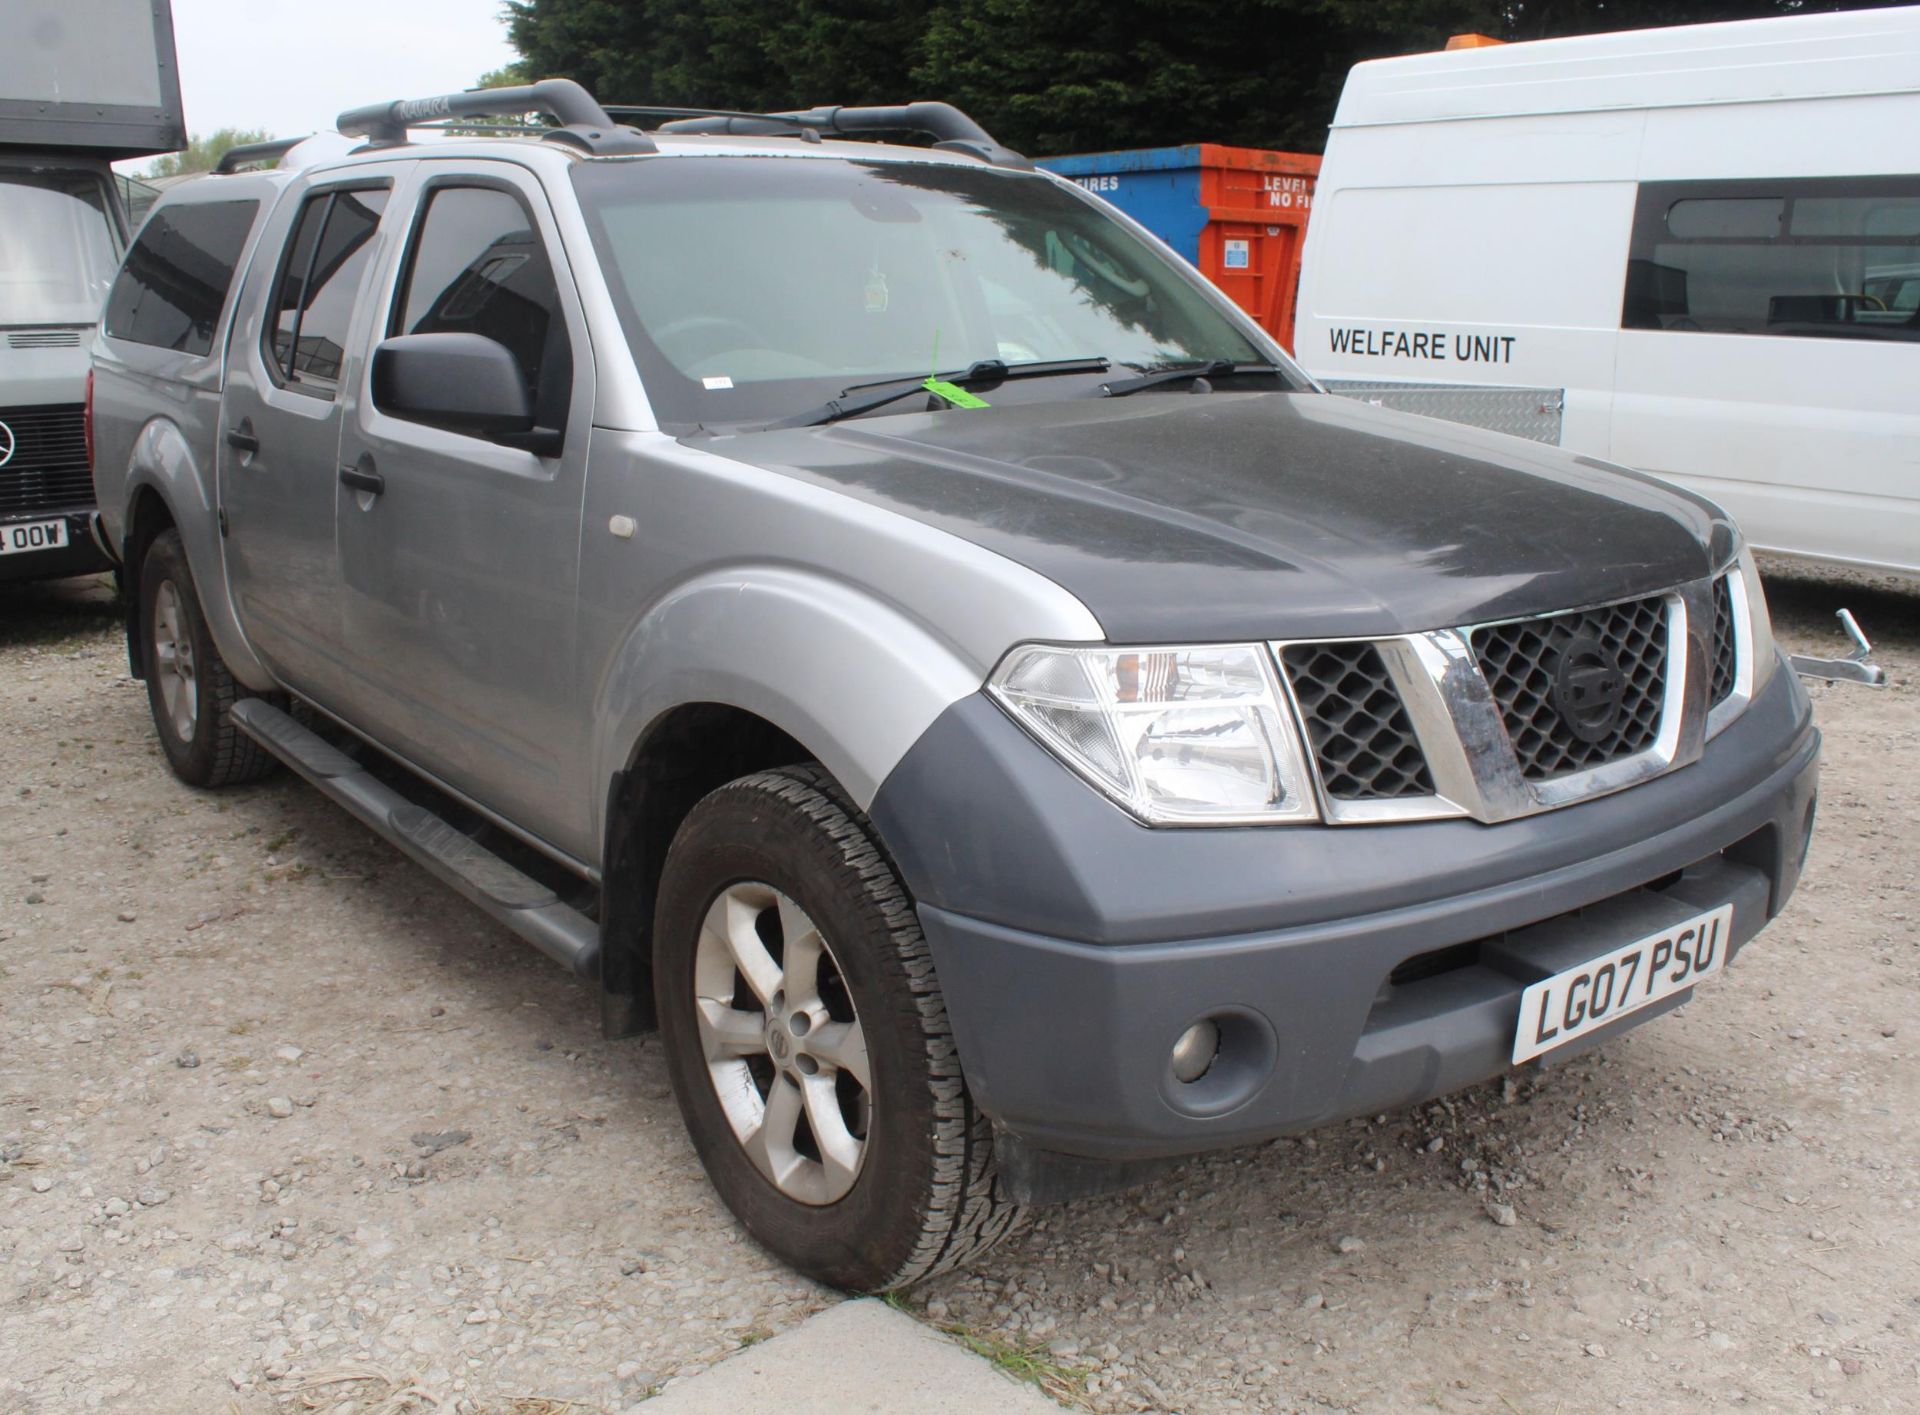 A SILVER 2007 NISSAN NAVARA AUTO MATIC PICKUP, WITH DIESEL ENGINE AND AUTOMATIC TRANSITION,